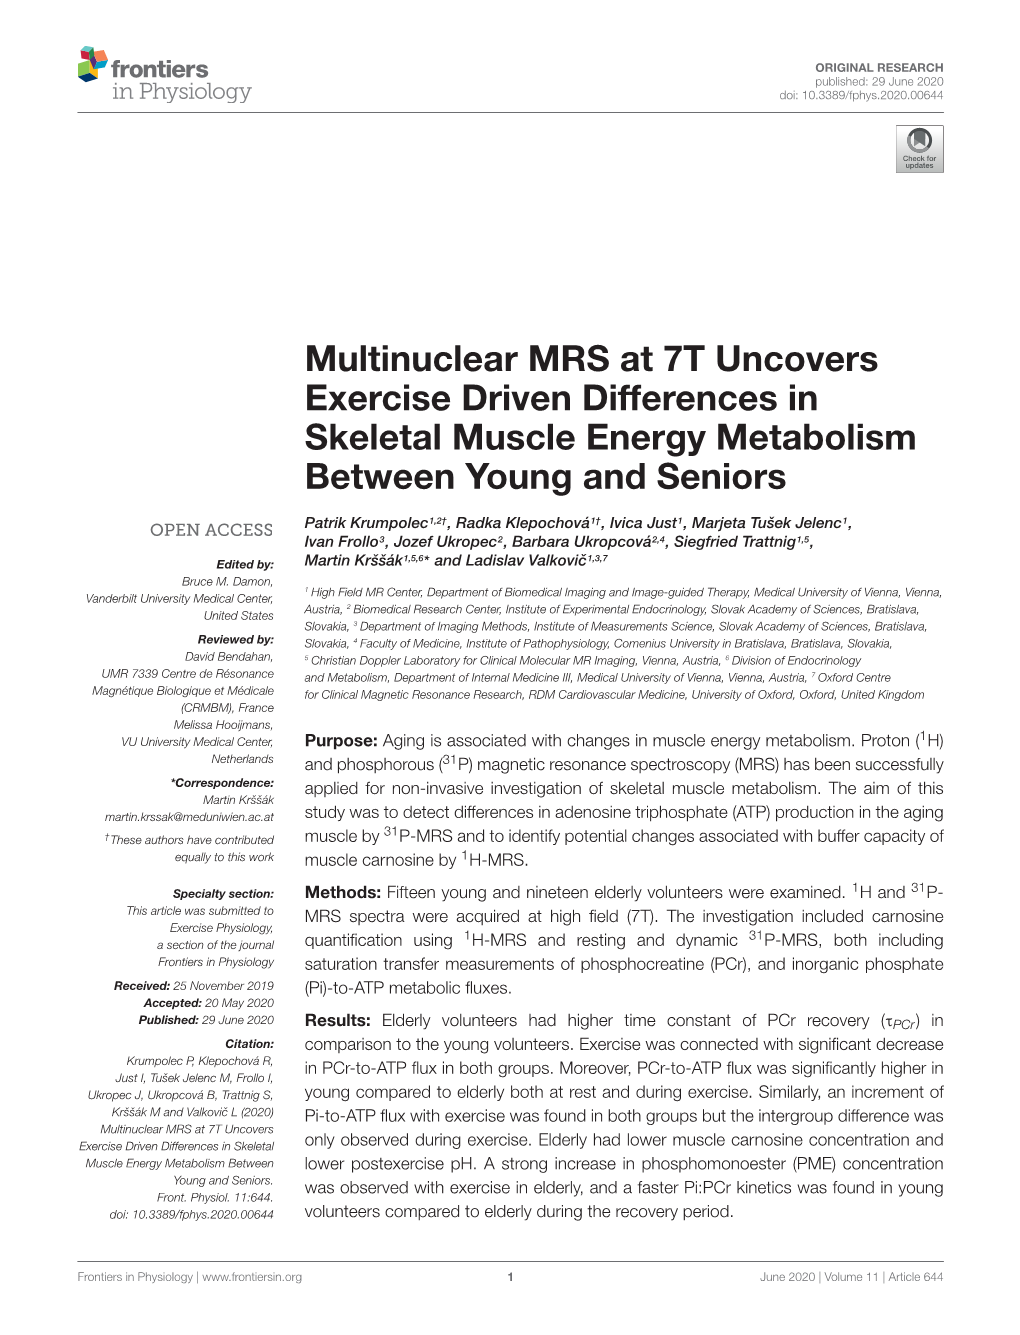 Multinuclear MRS at 7T Uncovers Exercise Driven Differences in Skeletal Muscle Energy Metabolism Between Young and Seniors